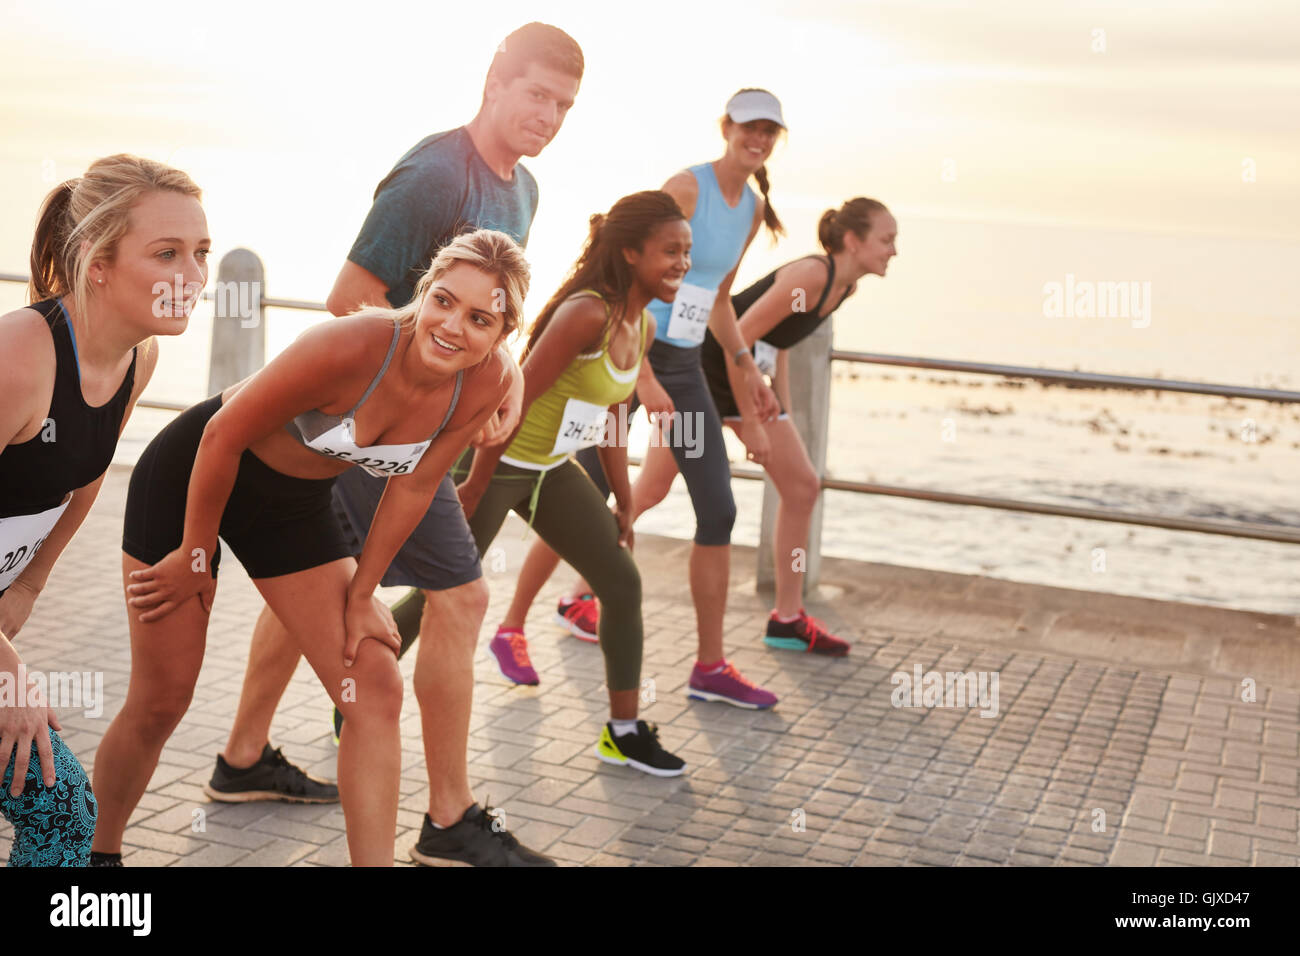 Shot of athletes at the starting point of a marathon. Diverse group of people running together on seaside promenade. Stock Photo